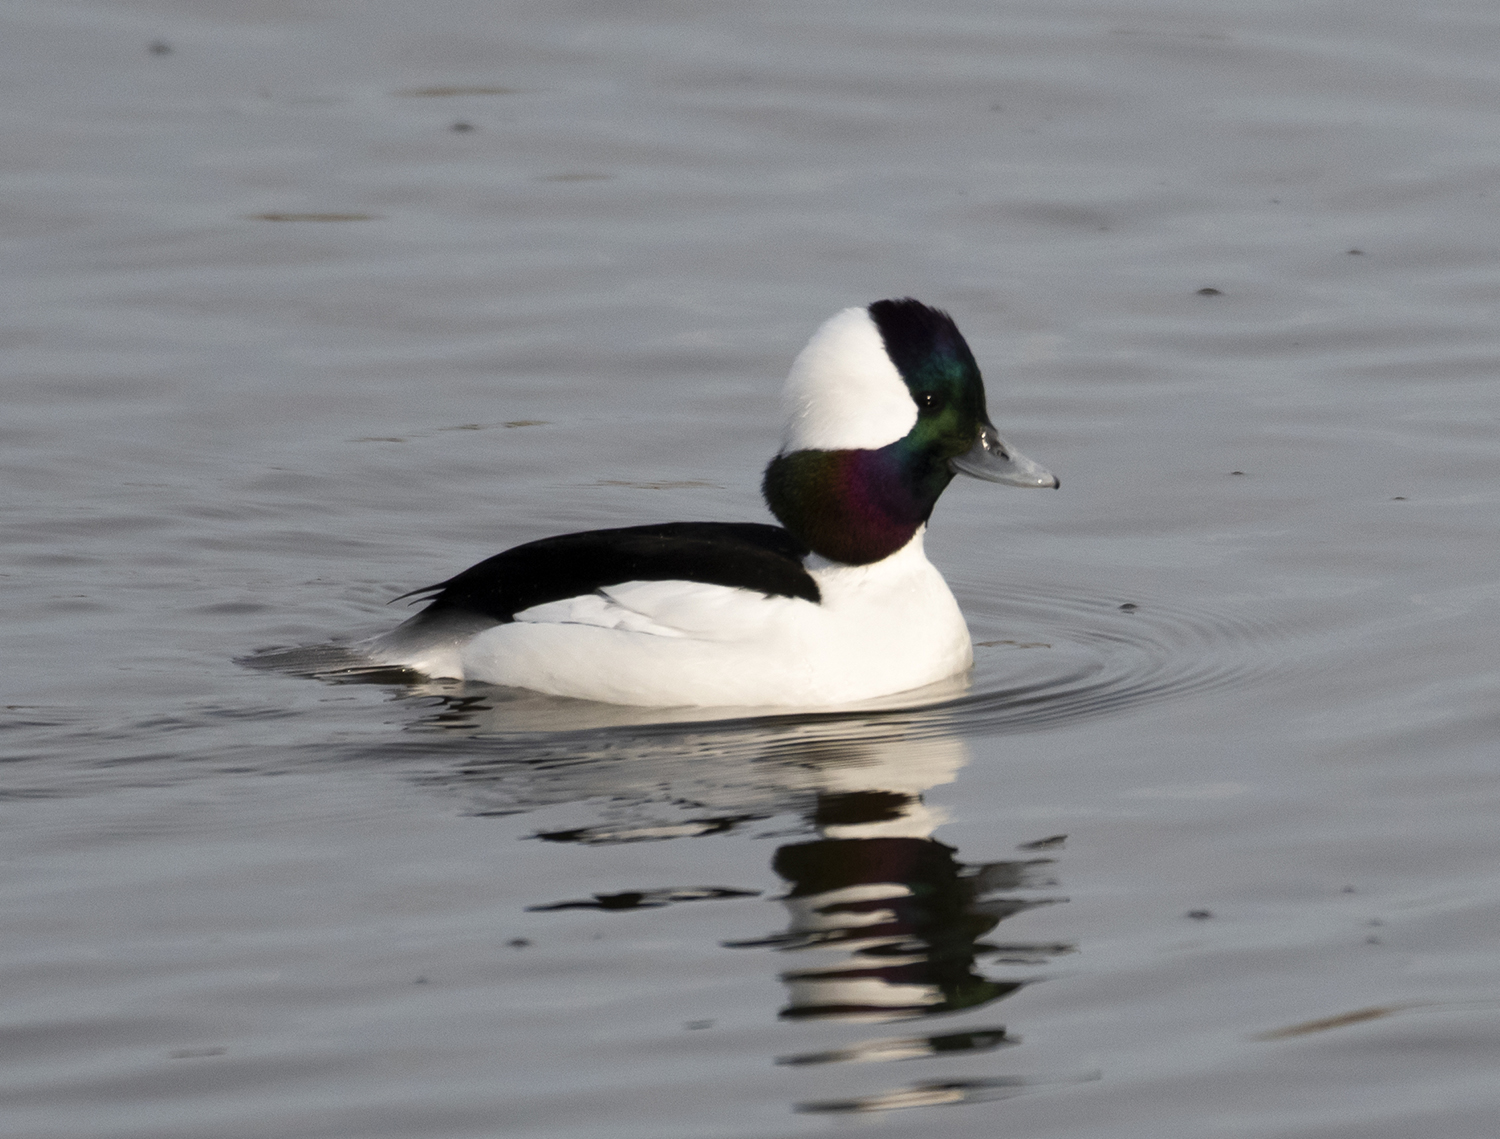 A bufflehead nickname in Spanish is ‘pato pinto’ (pinto duck), like a pinto horse. (Photo by Gail Karlsson)